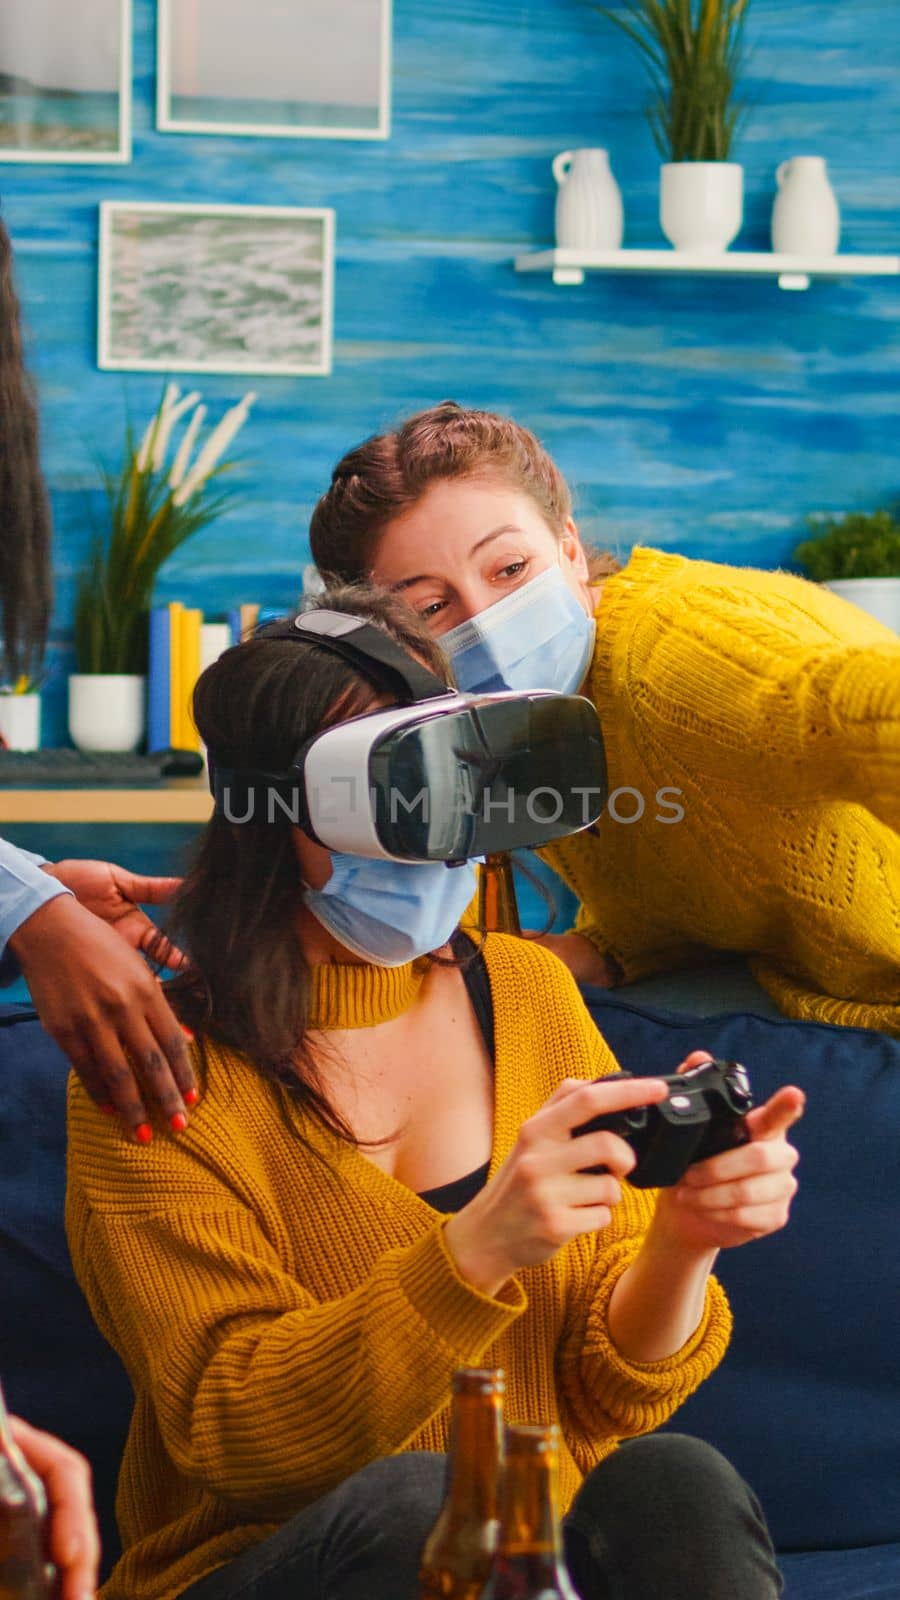 Woman playing video games wearing vr headset by DCStudio